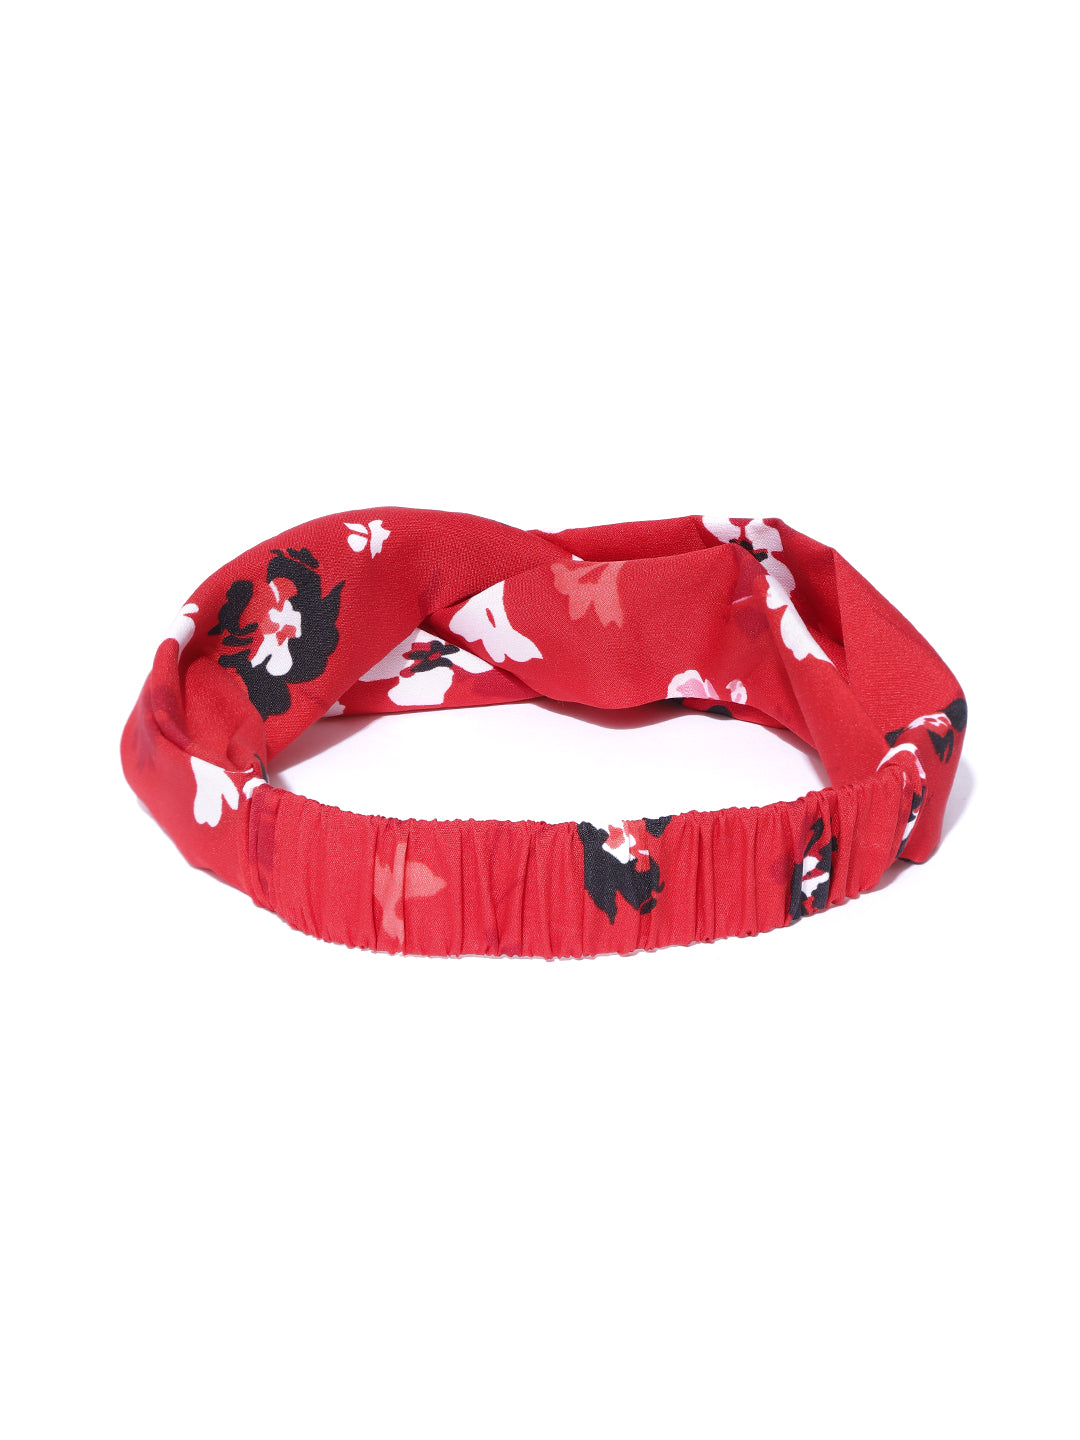 Blueberry multi floral printed red hairband